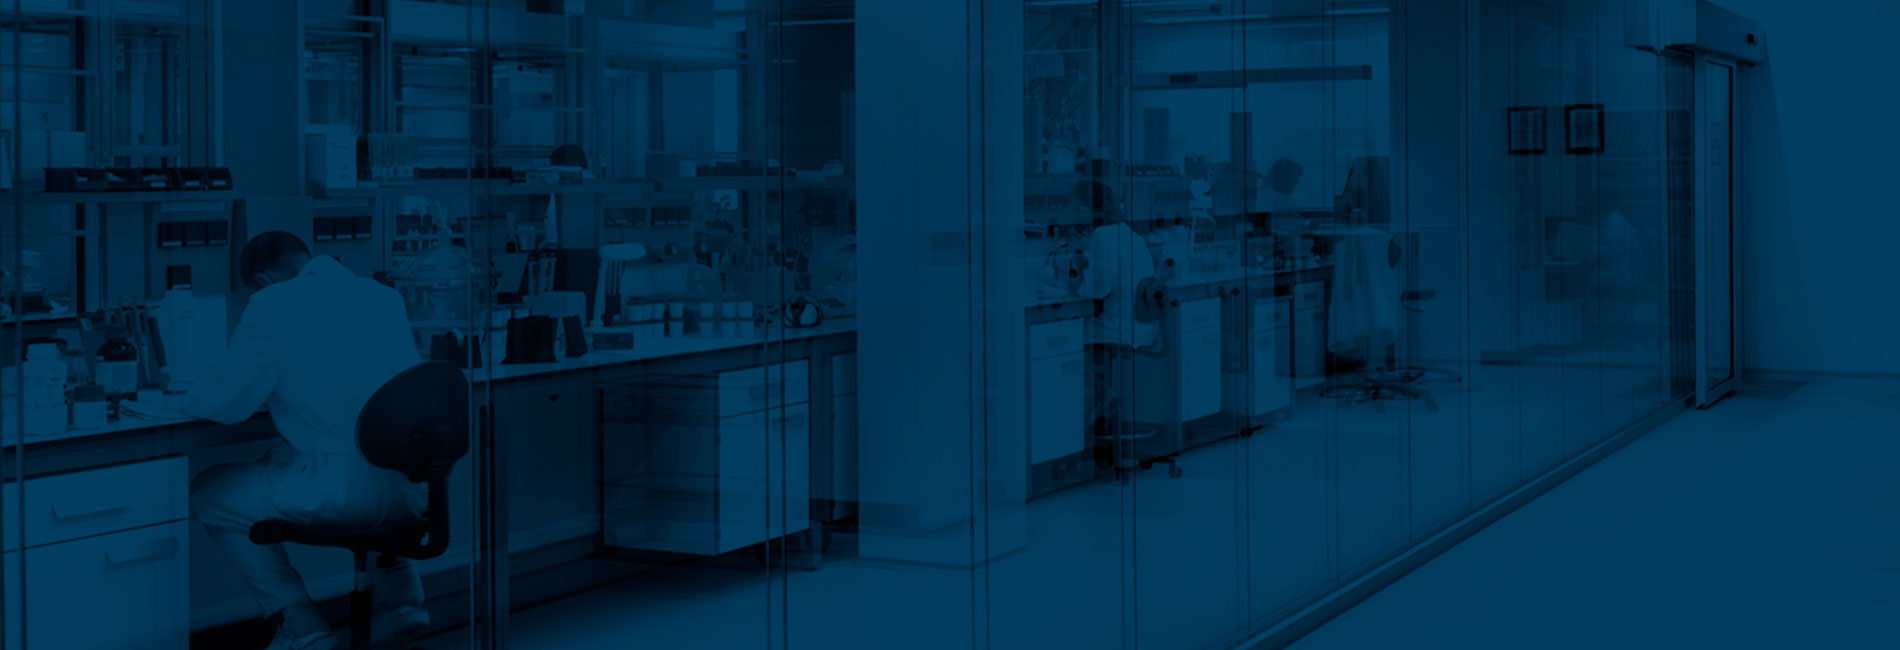 Blue image of people at work on laboratory benches designed by Burdinola.